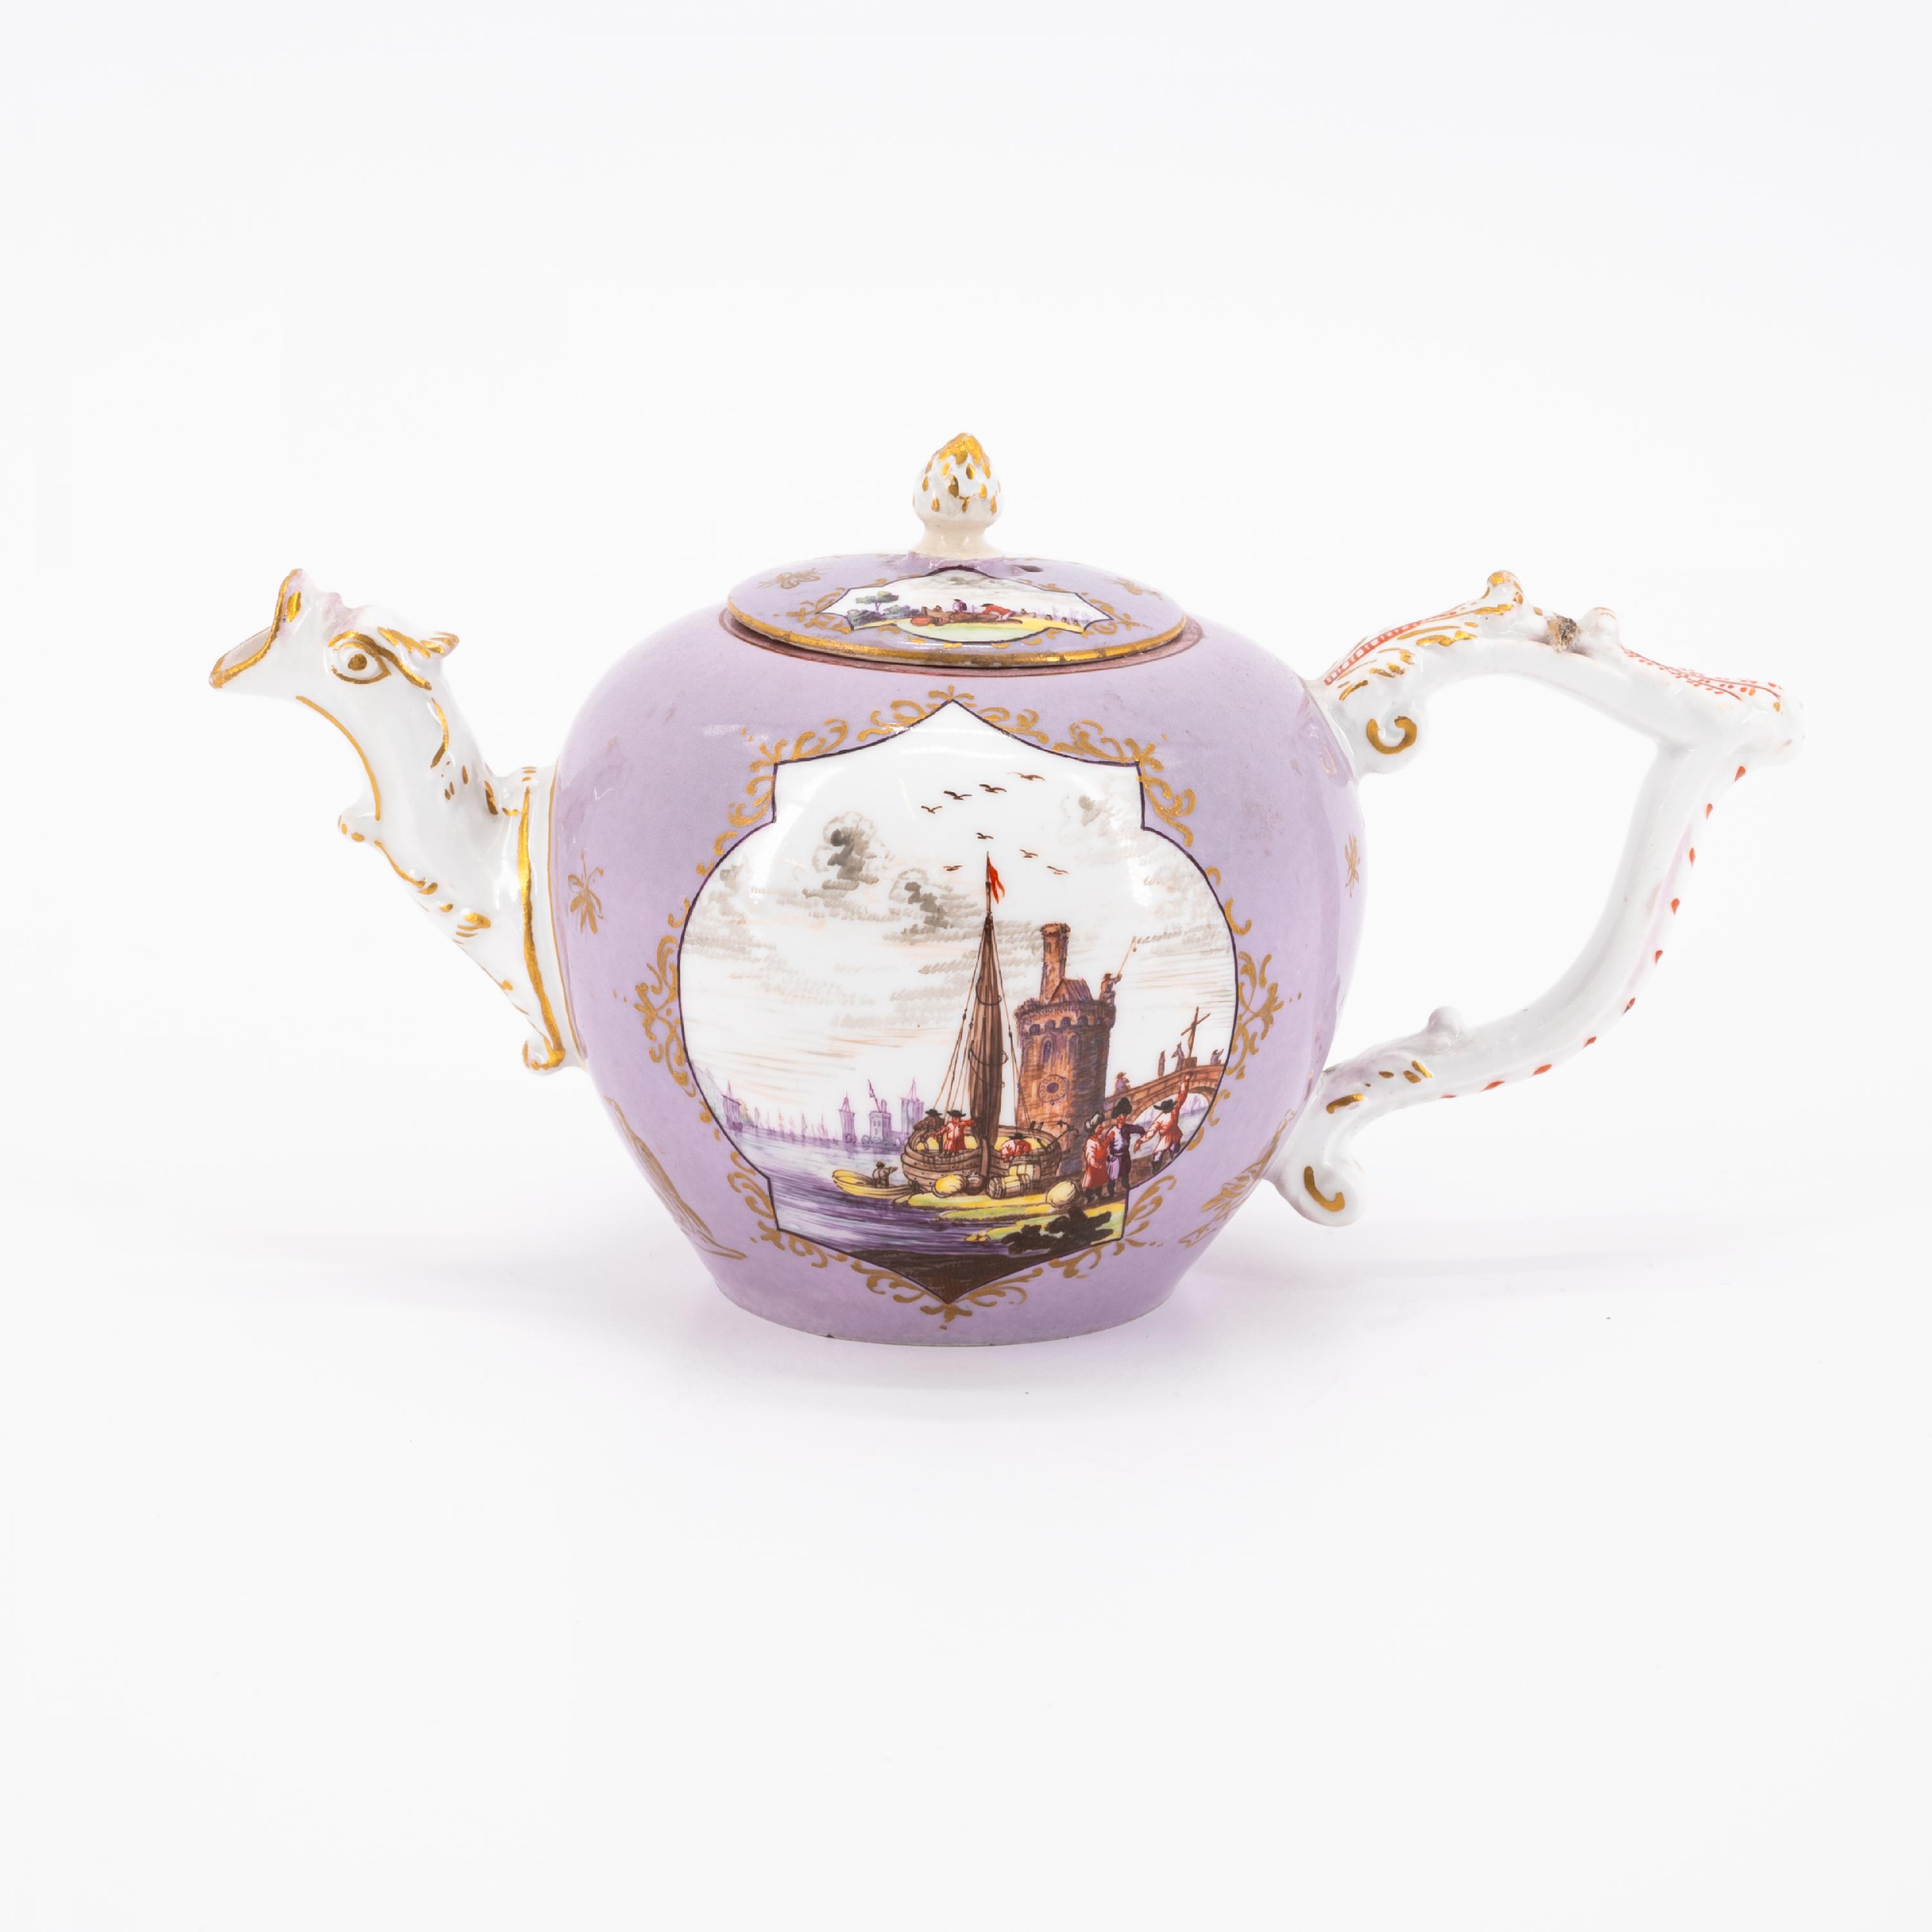 PORCELAIN TEAPOT AND COFFEEPOT WITH PURPLE GROUND AND MERCHANTS NAVY SCENES - Image 8 of 11